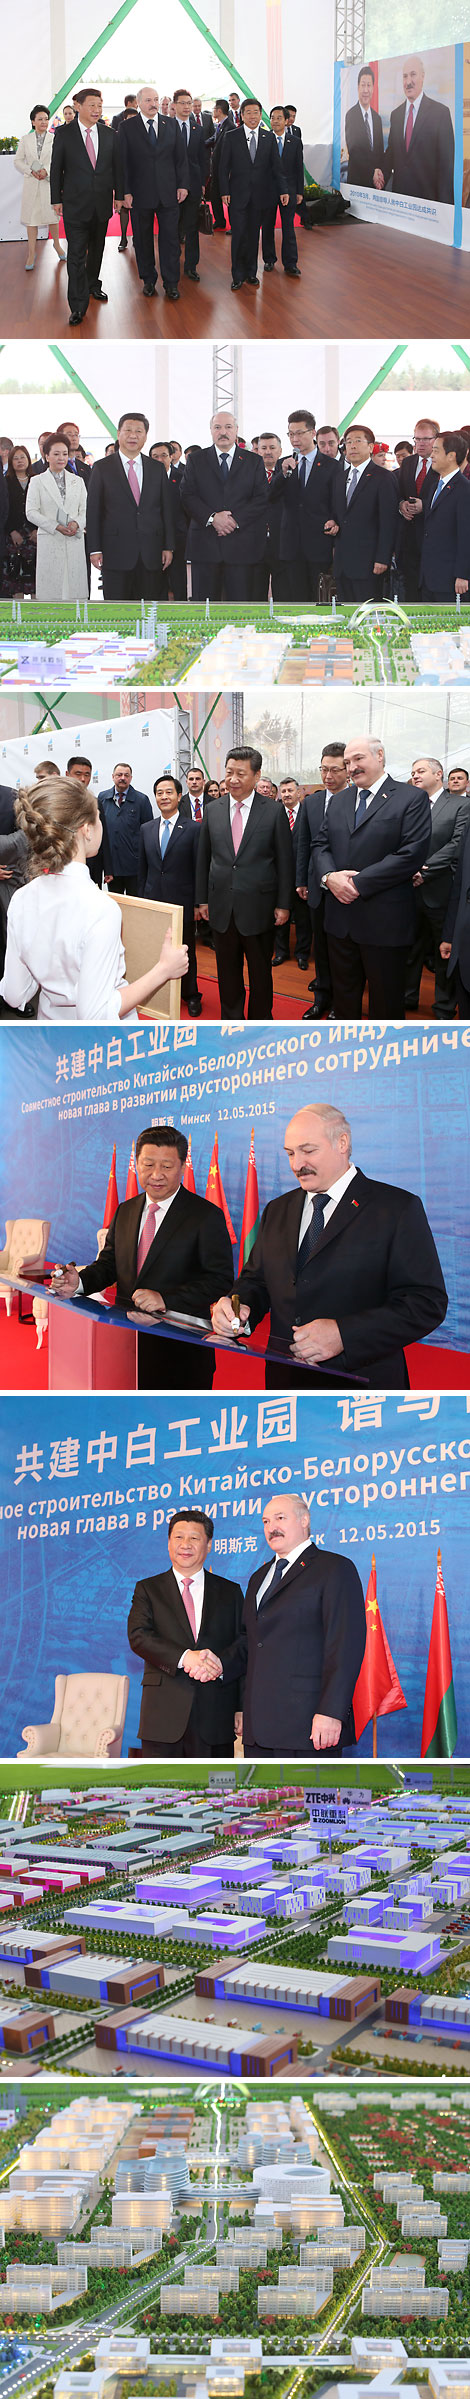 Presidents of Belarus and China visit Chinese-Belarusian Industrial Park